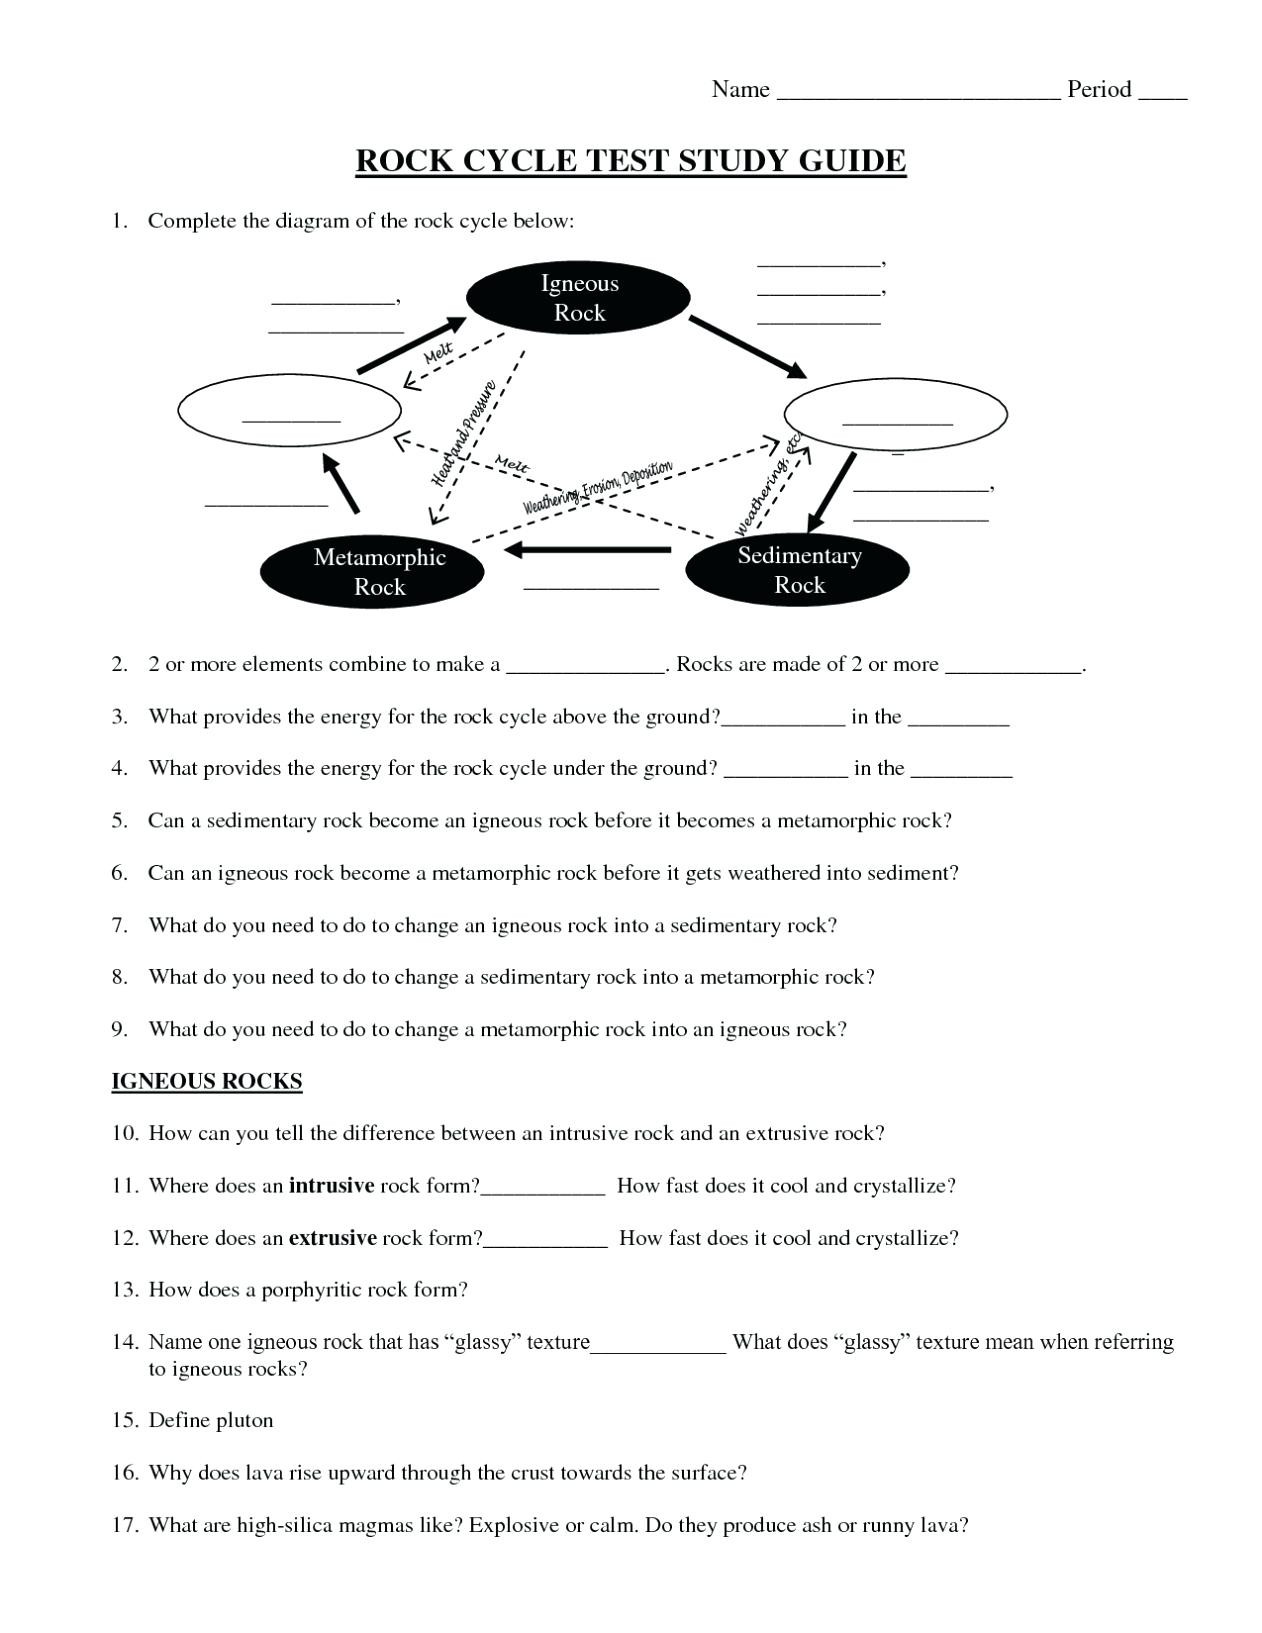 Carbon Cycle Diagram Worksheet Water Cycle Worksheet Fill In the Blank Carbon Cycle